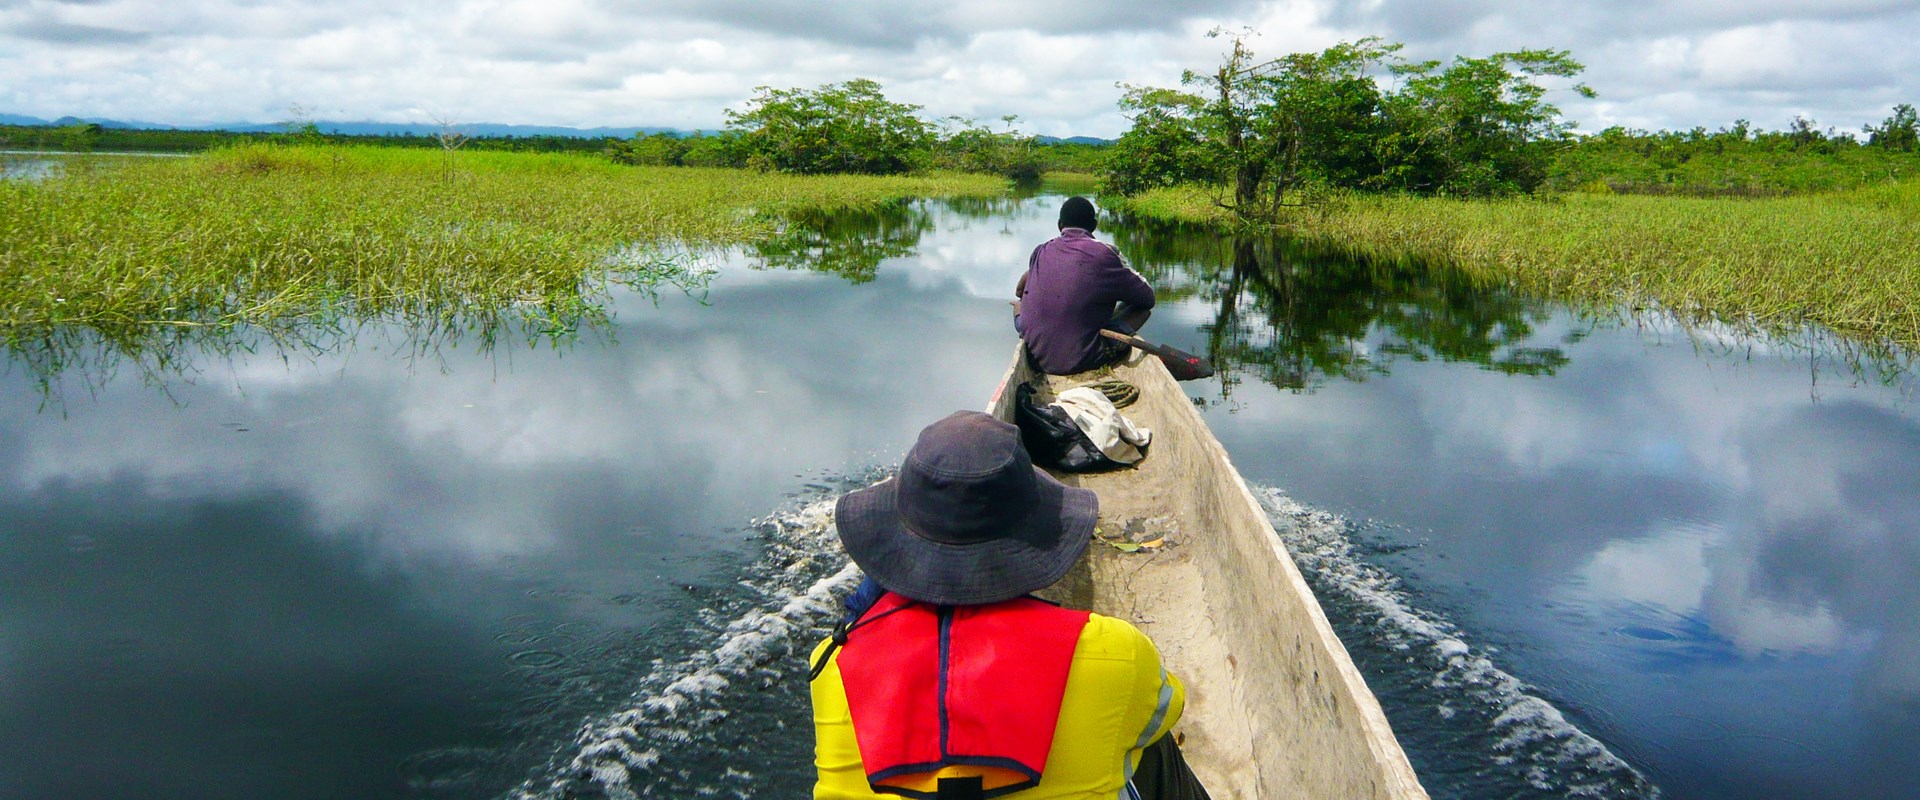 BMT environmental engineers in a canoe on a river in Papua New Guinea